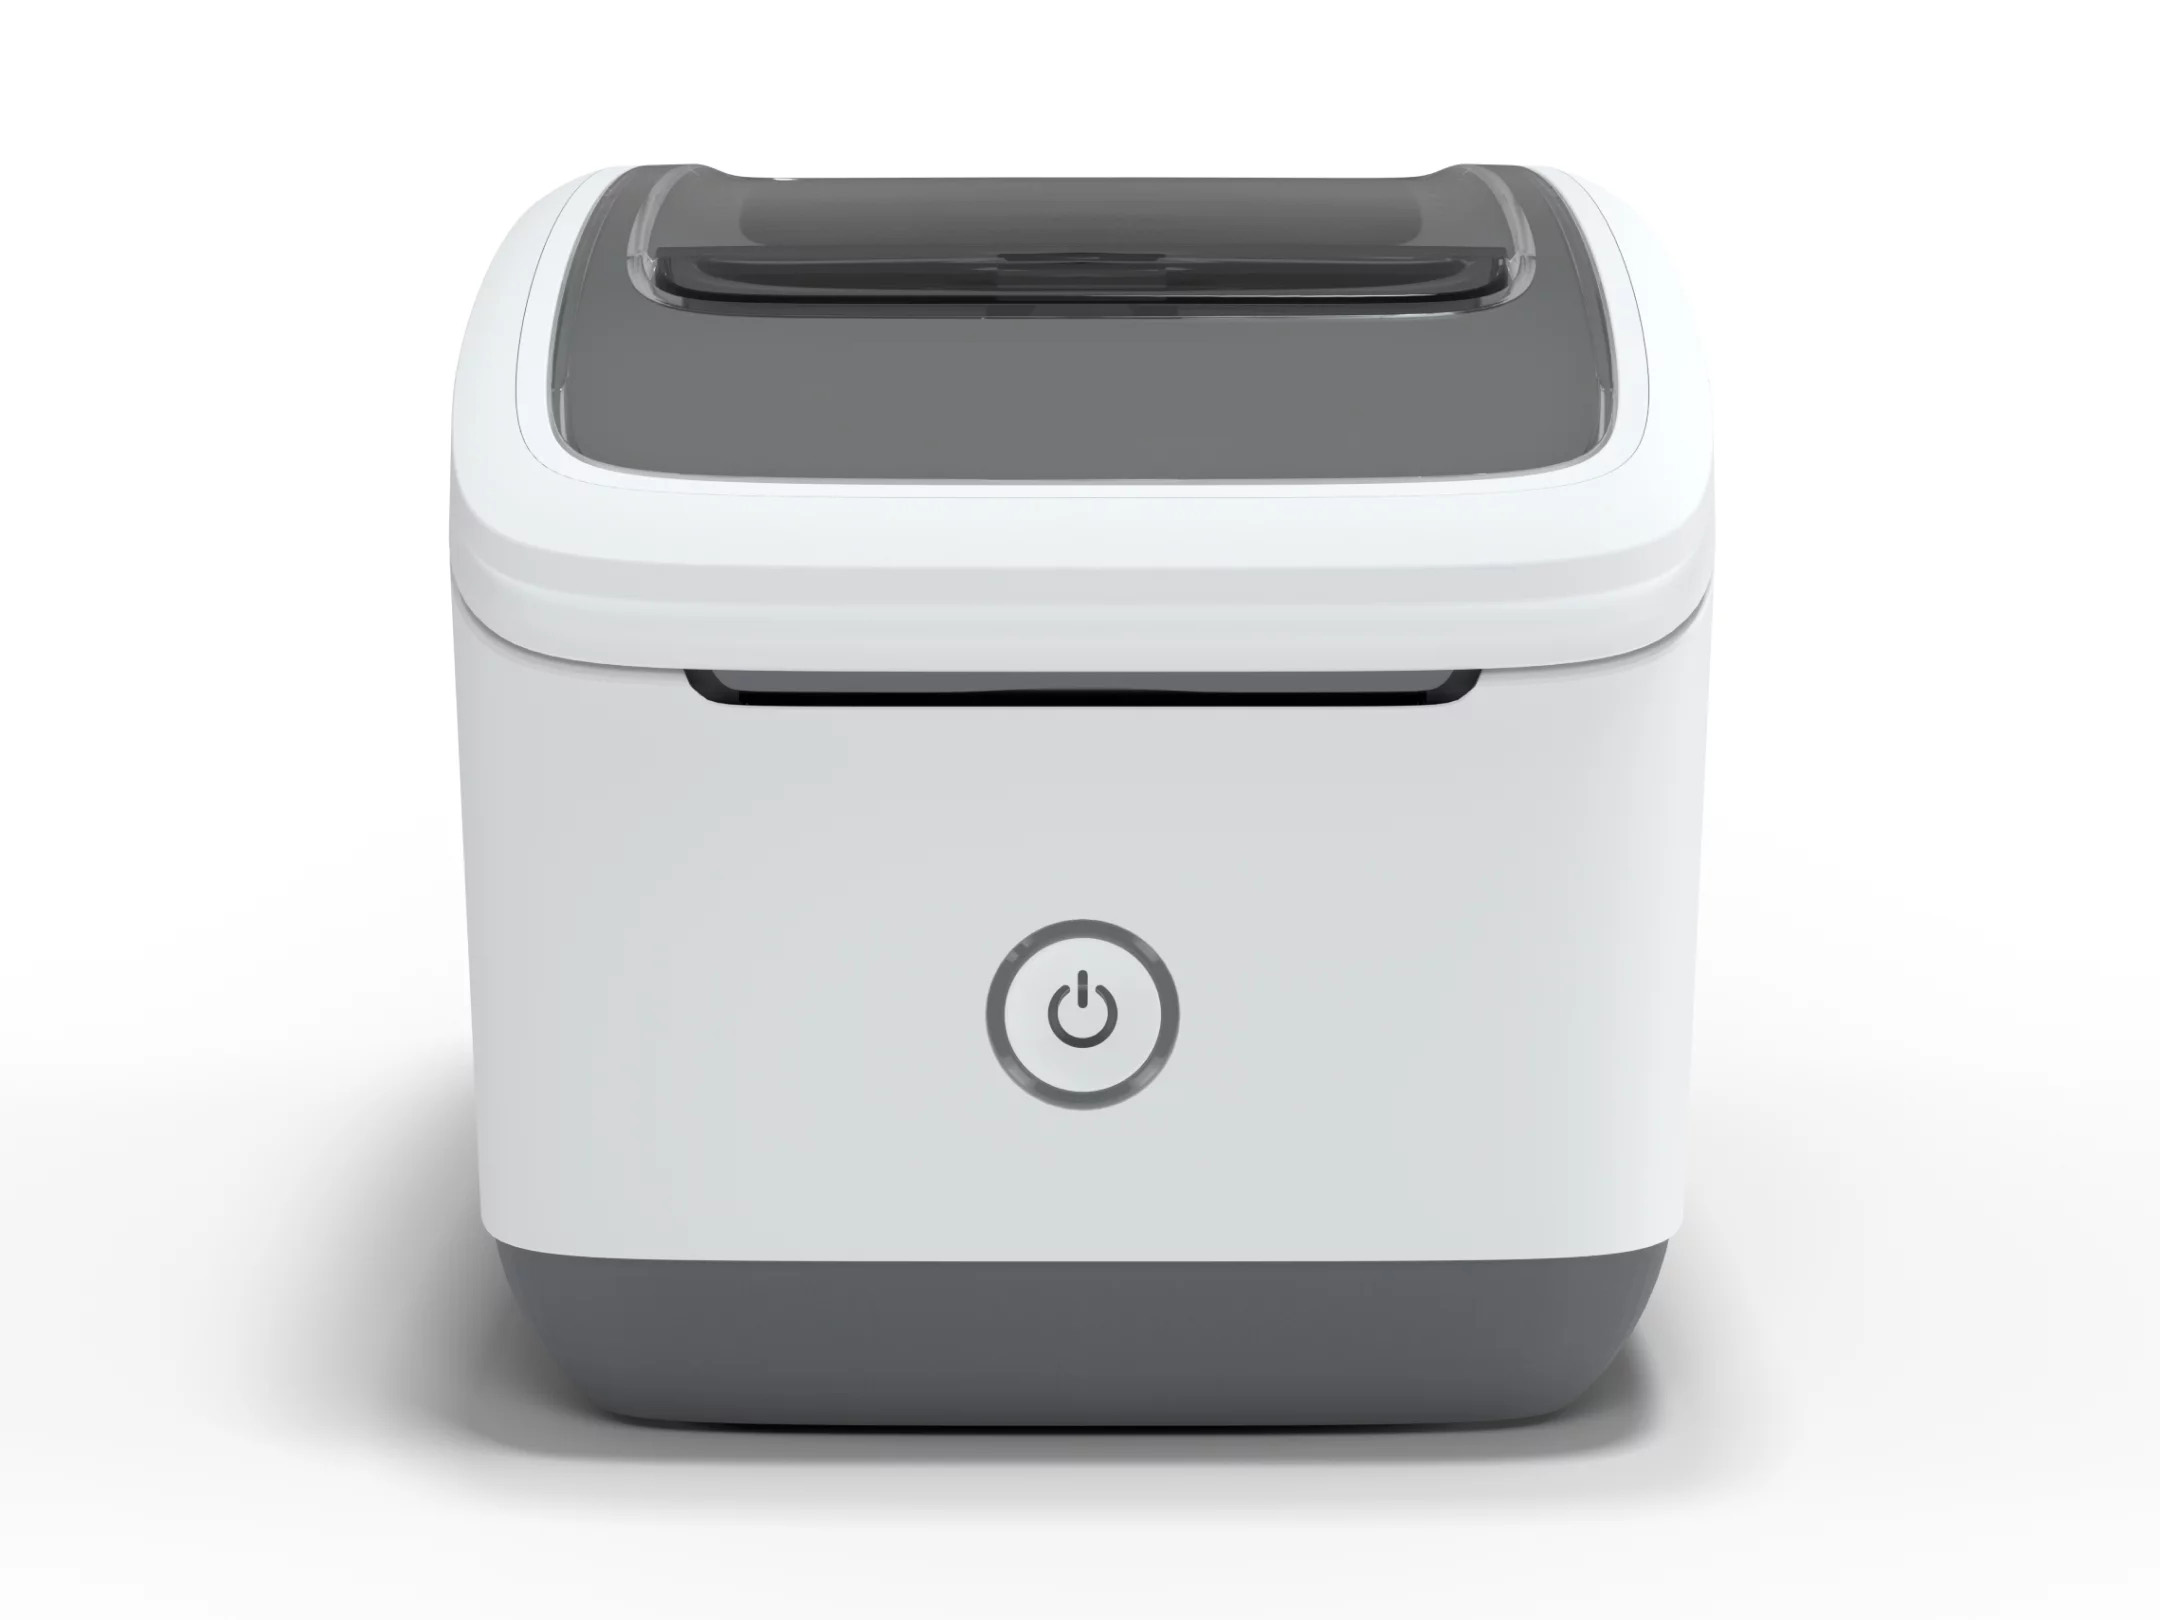 Thermal Label Printer - Small Home Office Wireless Labeling for Address, Folders, Shipping, Barcodes. Compatible w/UPS, USPS, Shopify, Ebay, FedEx, Amazon, Etsy -DP12-2-in Width